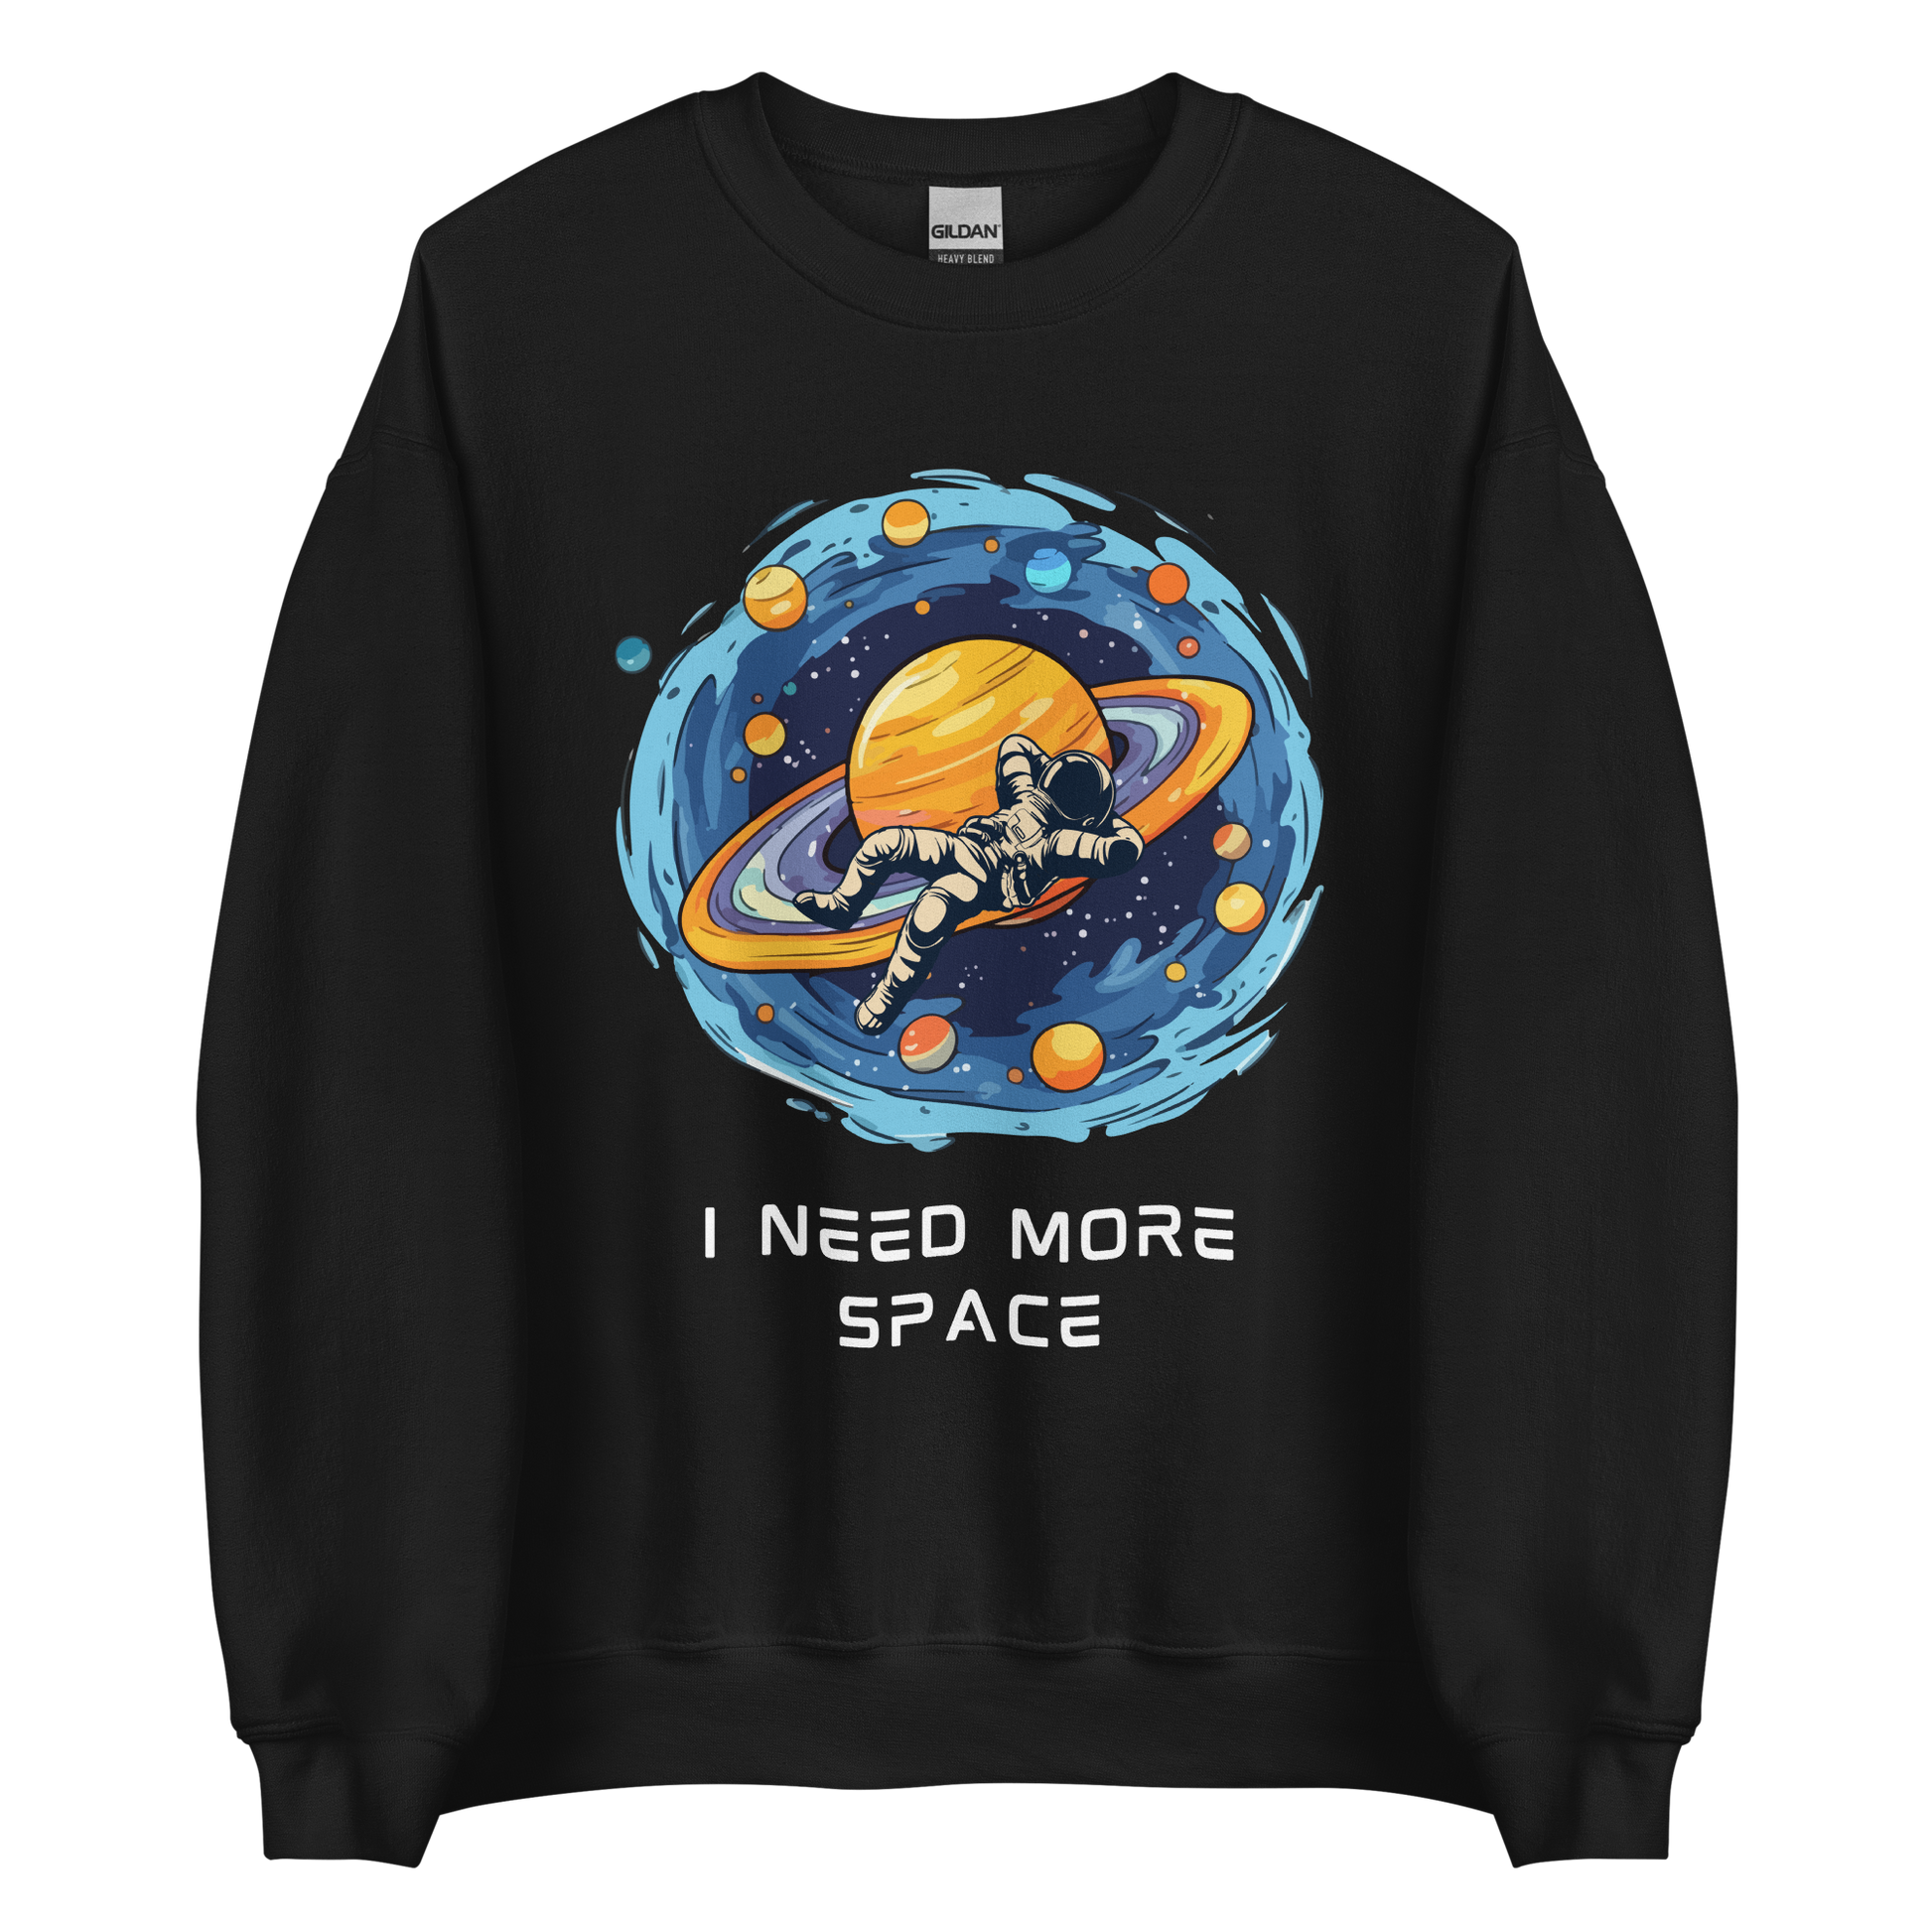 Black Astronaut Sweatshirt featuring a captivating I Need More Space graphic on the chest - Funny Graphic Space Sweatshirts - Boozy Fox